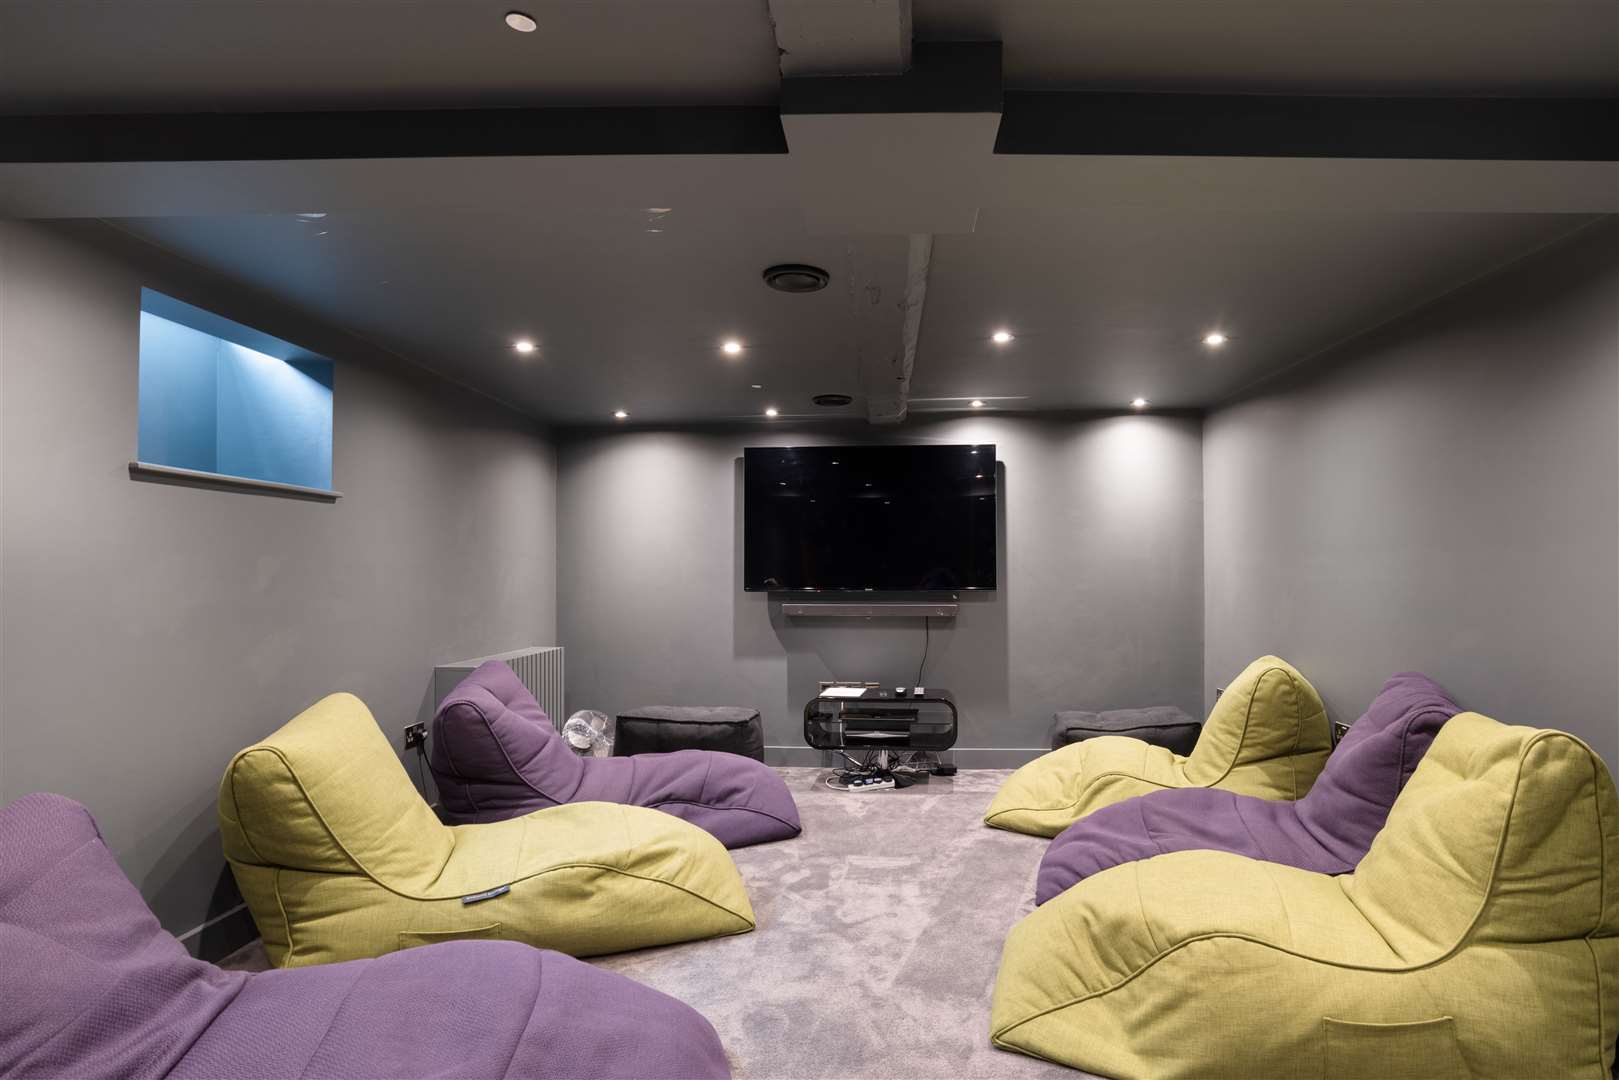 The cinema room in the basement Picture: Strutt and Parker